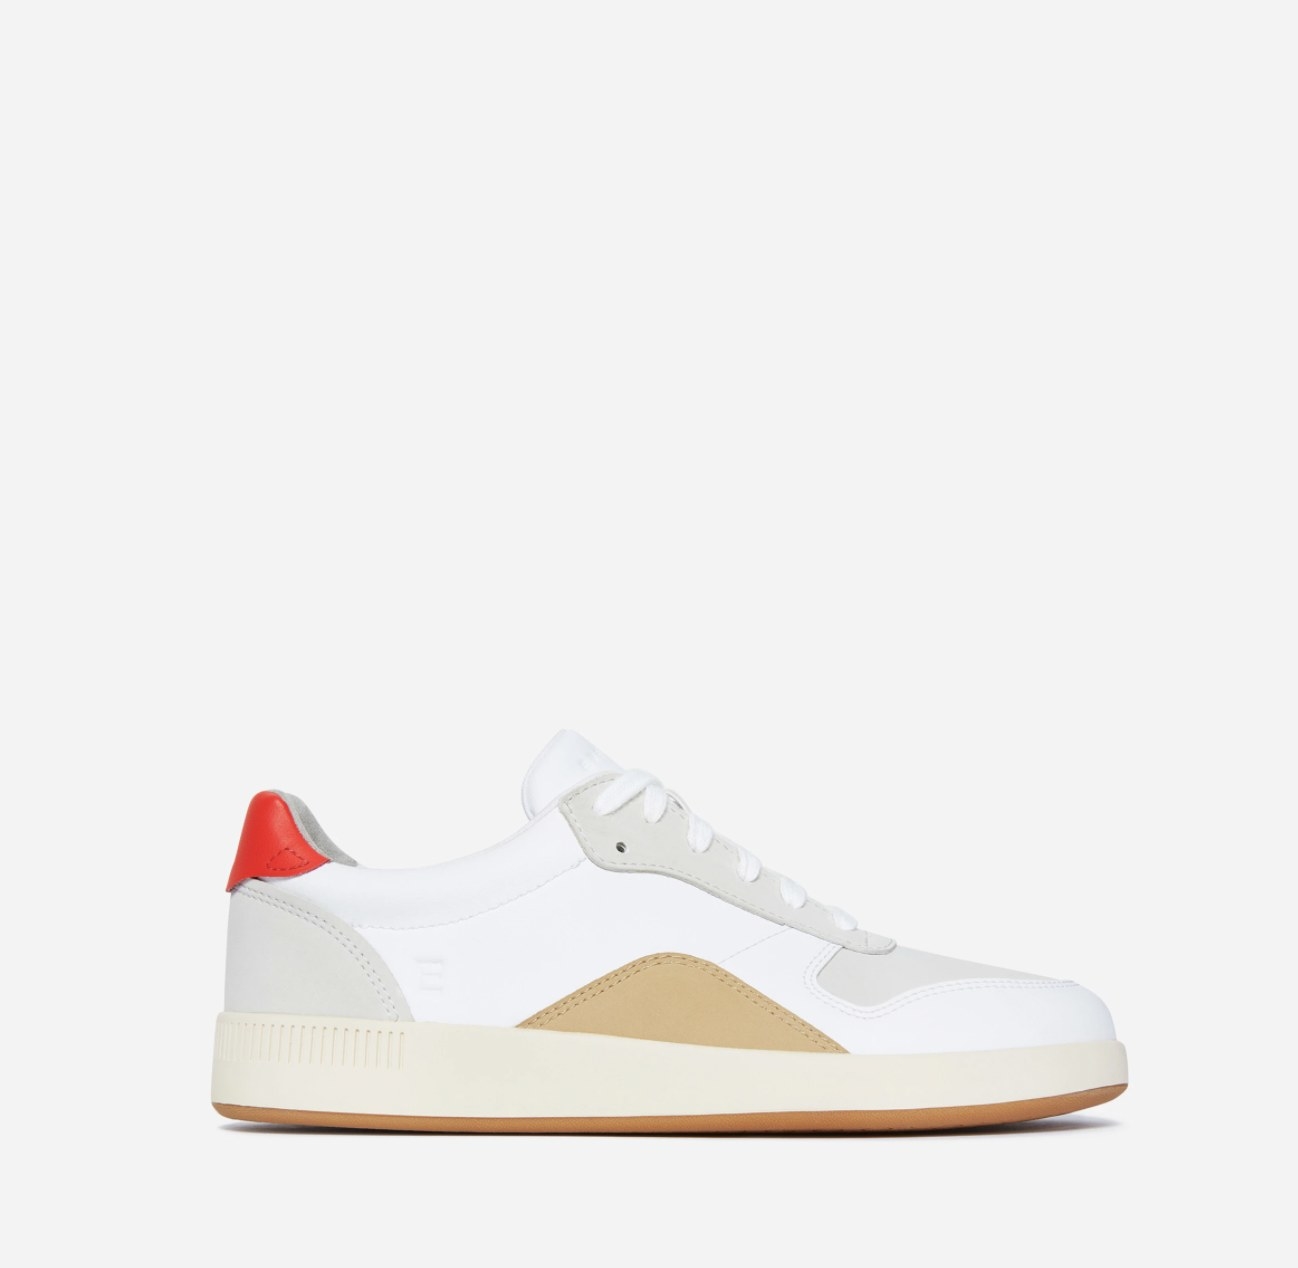 The white tennis court style sneaker with red heel block